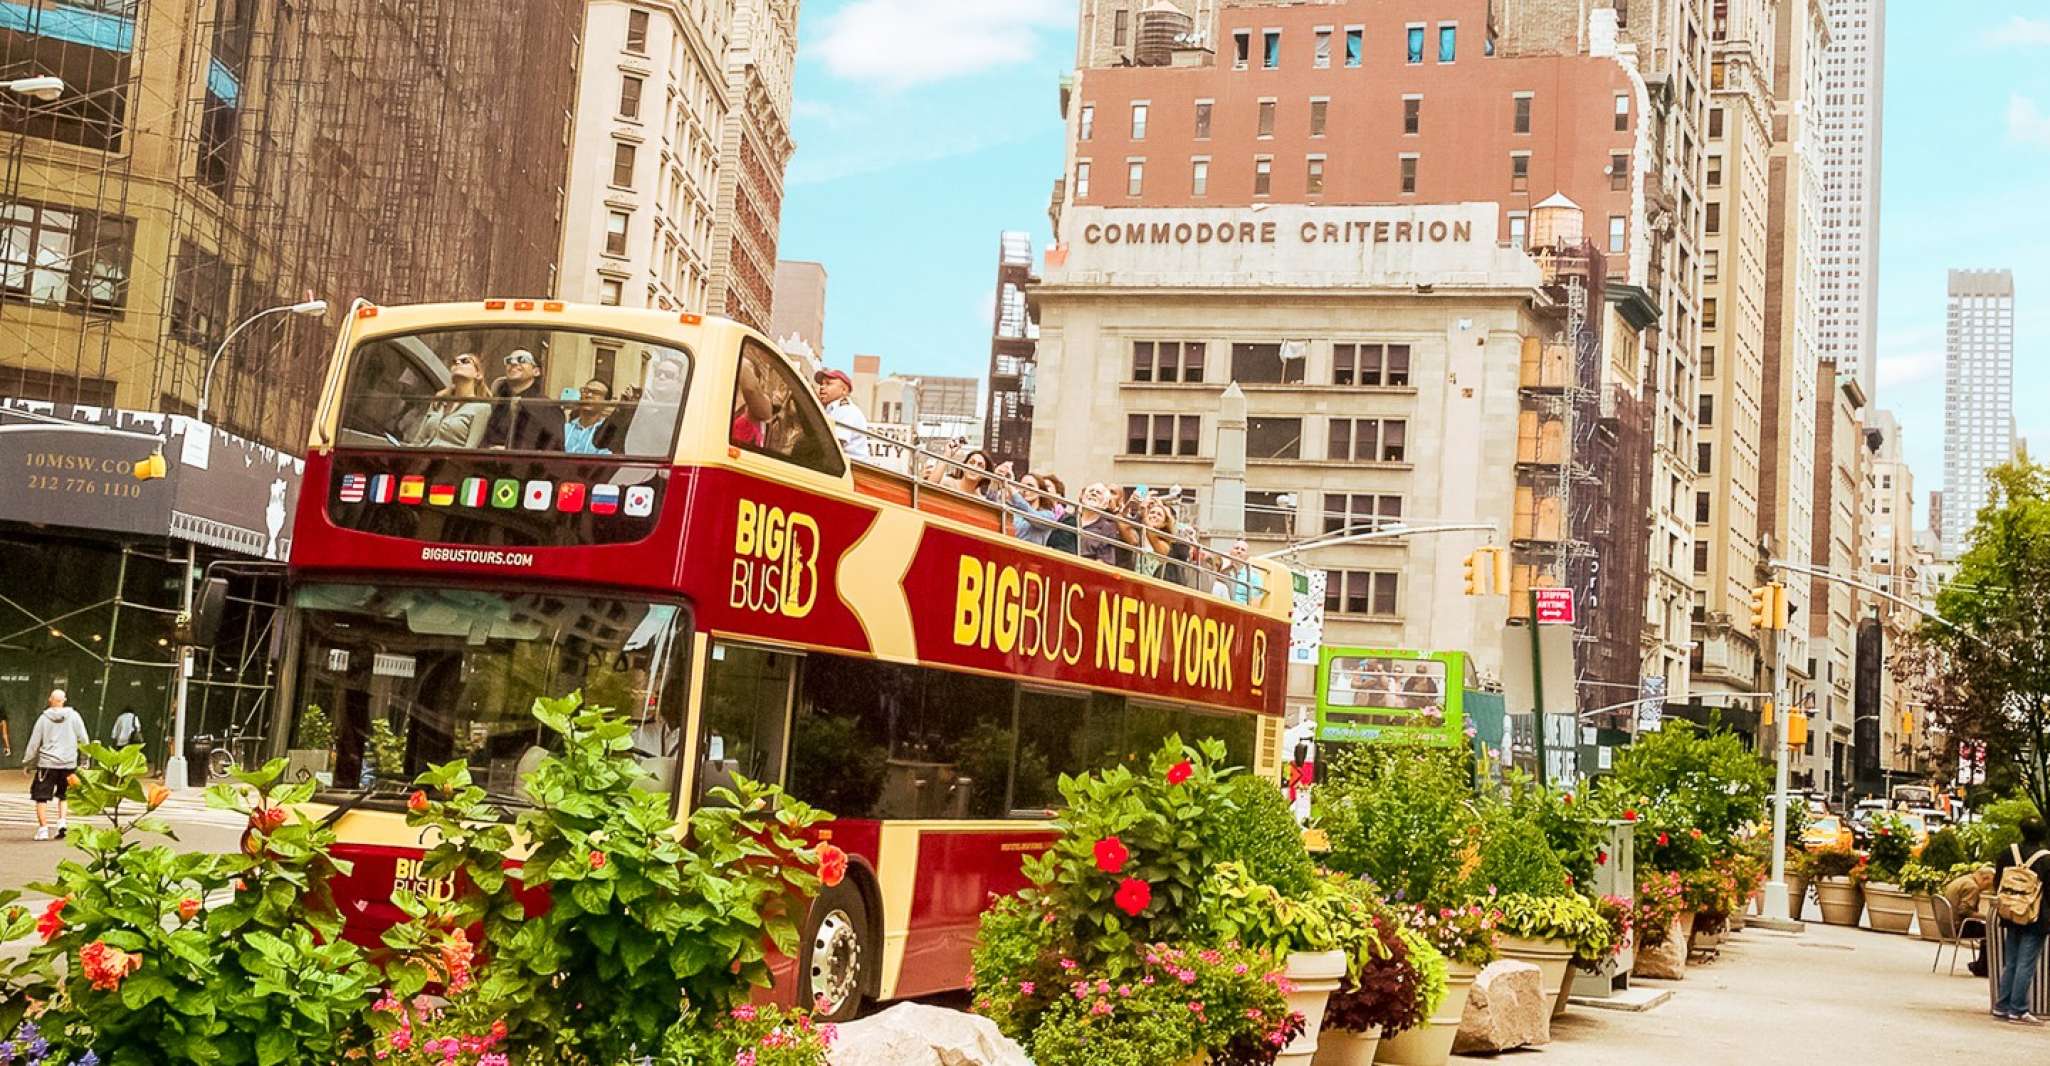 New York, Hop-on Hop-off Sightseeing Tour by Open-top Bus - Housity